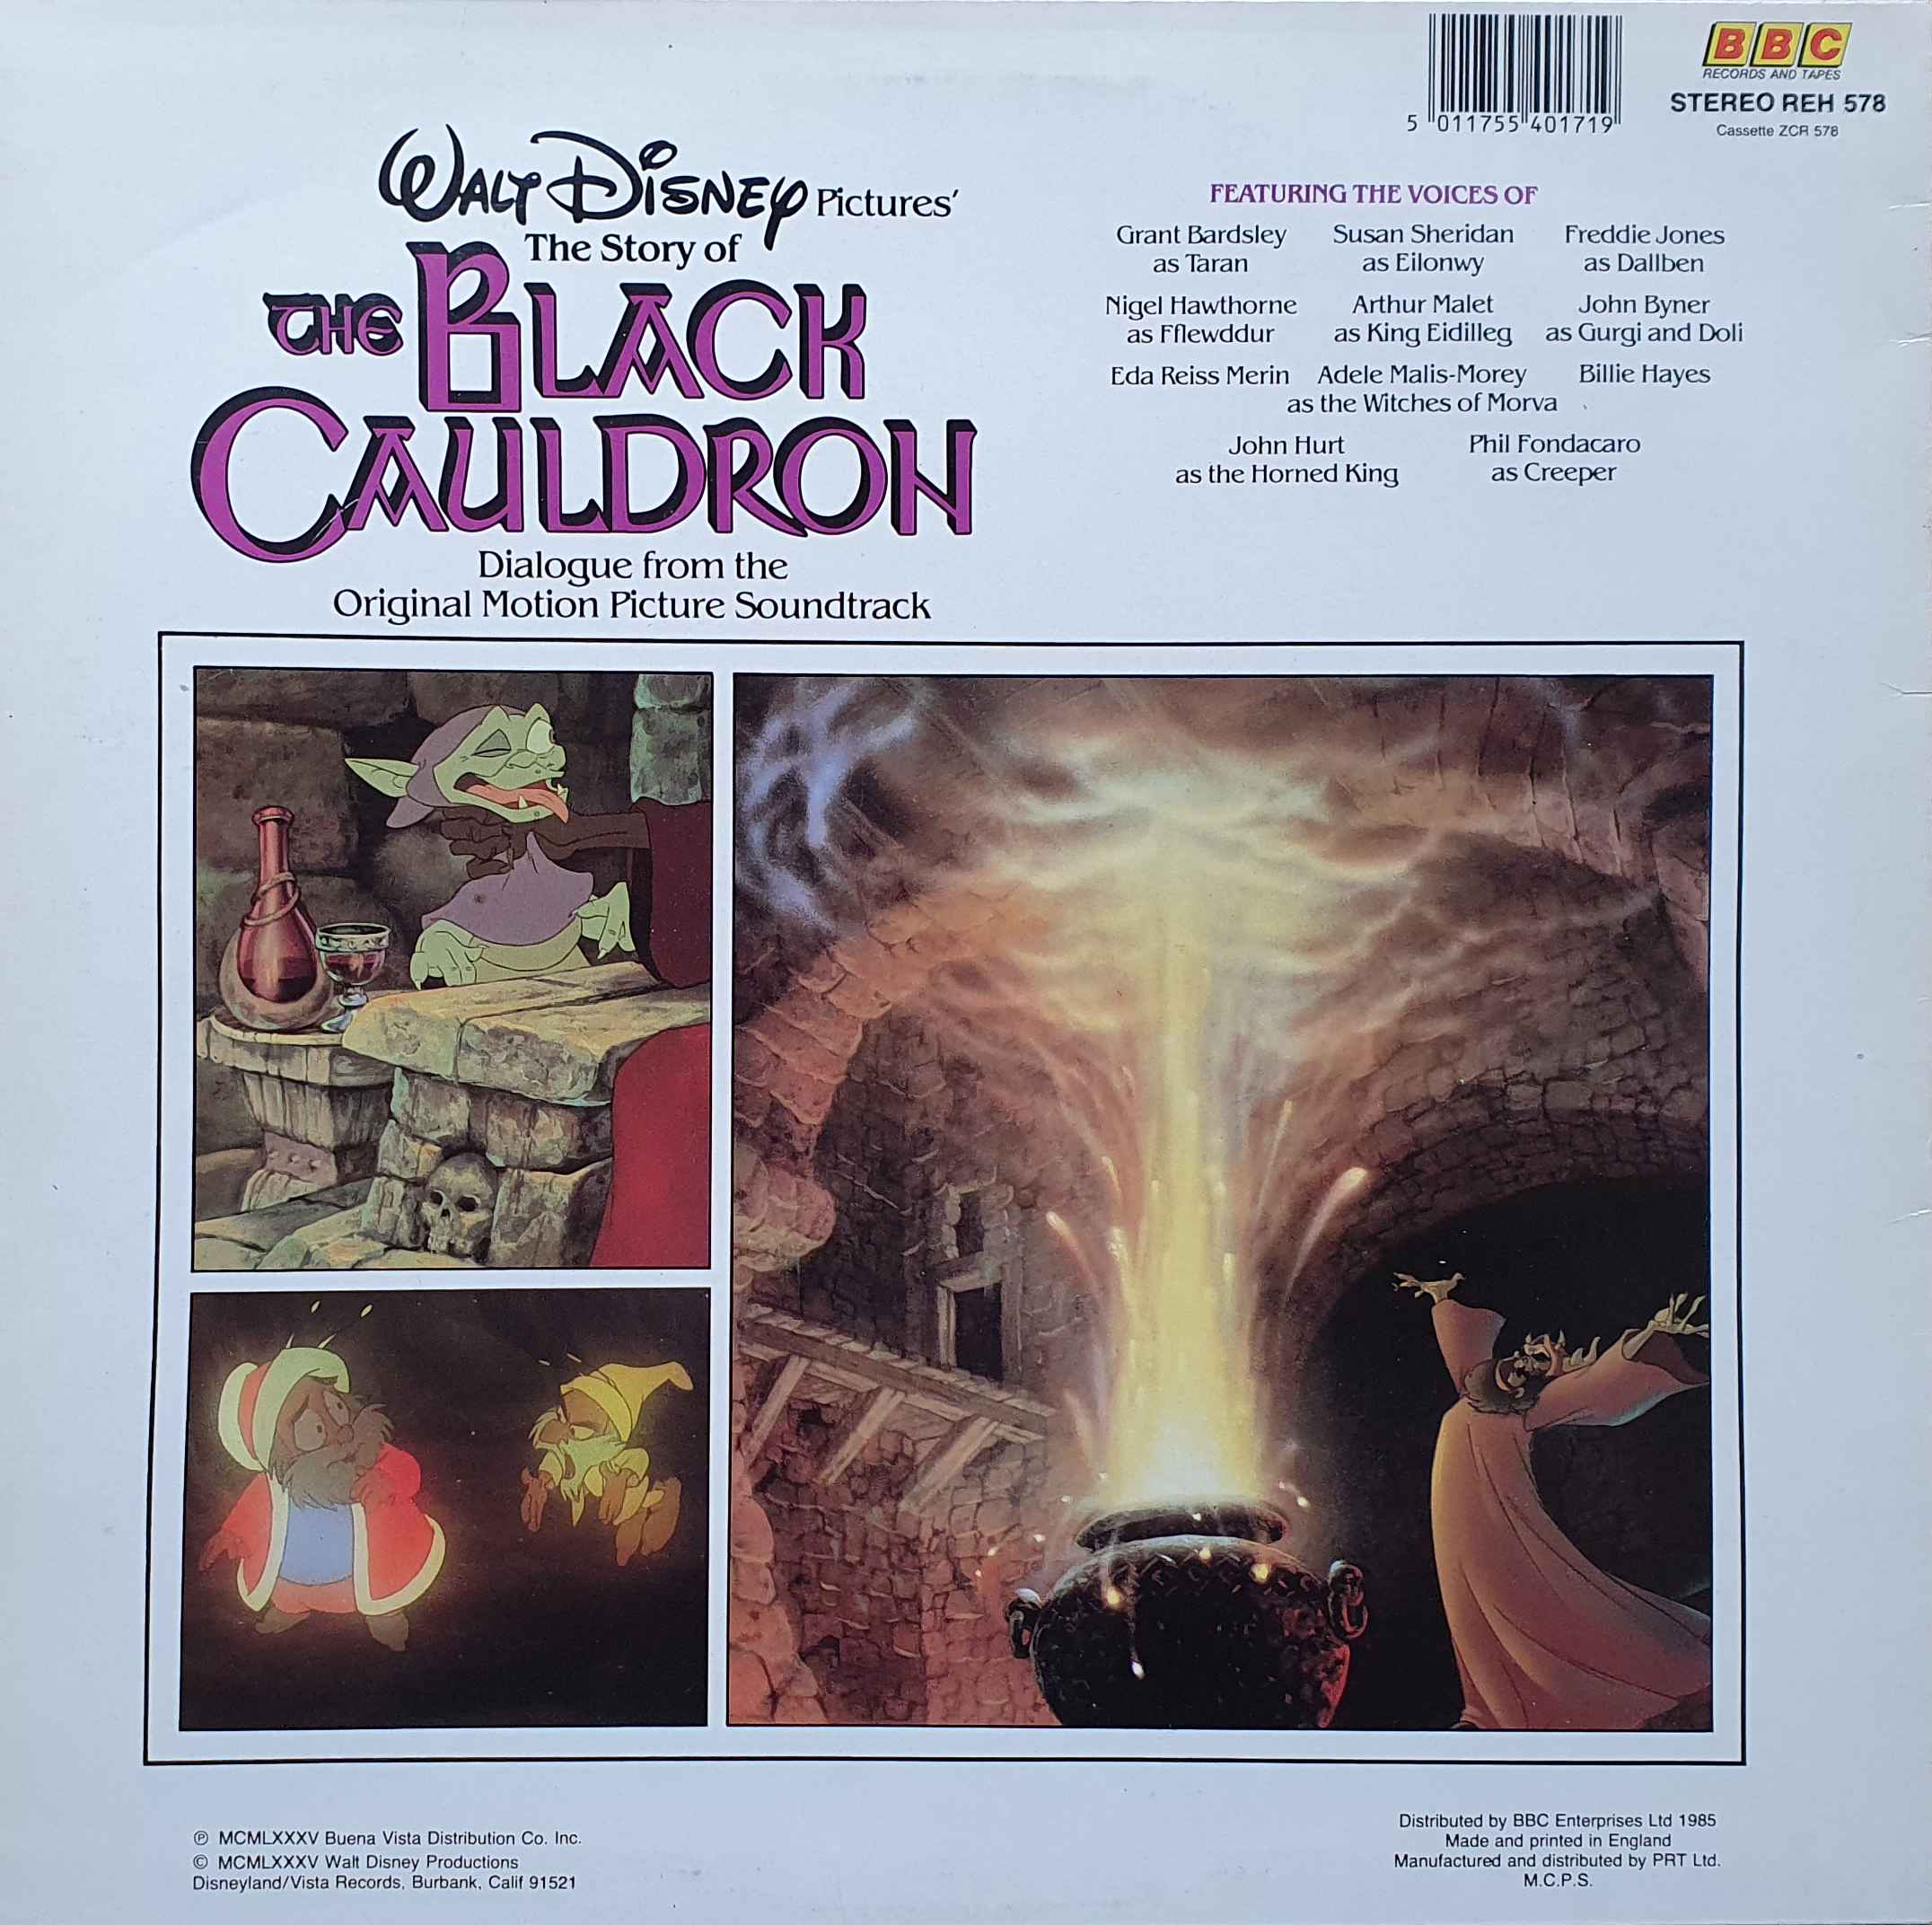 Picture of REH 578 The black cauldron by artist Ted Berman / Vance Gerry / Joe Hale / David Jonas / Roy Morita / Richard Rich / Art Stevens / Al Wilson / Peter Young / Ron Clements / John Musker from the BBC records and Tapes library